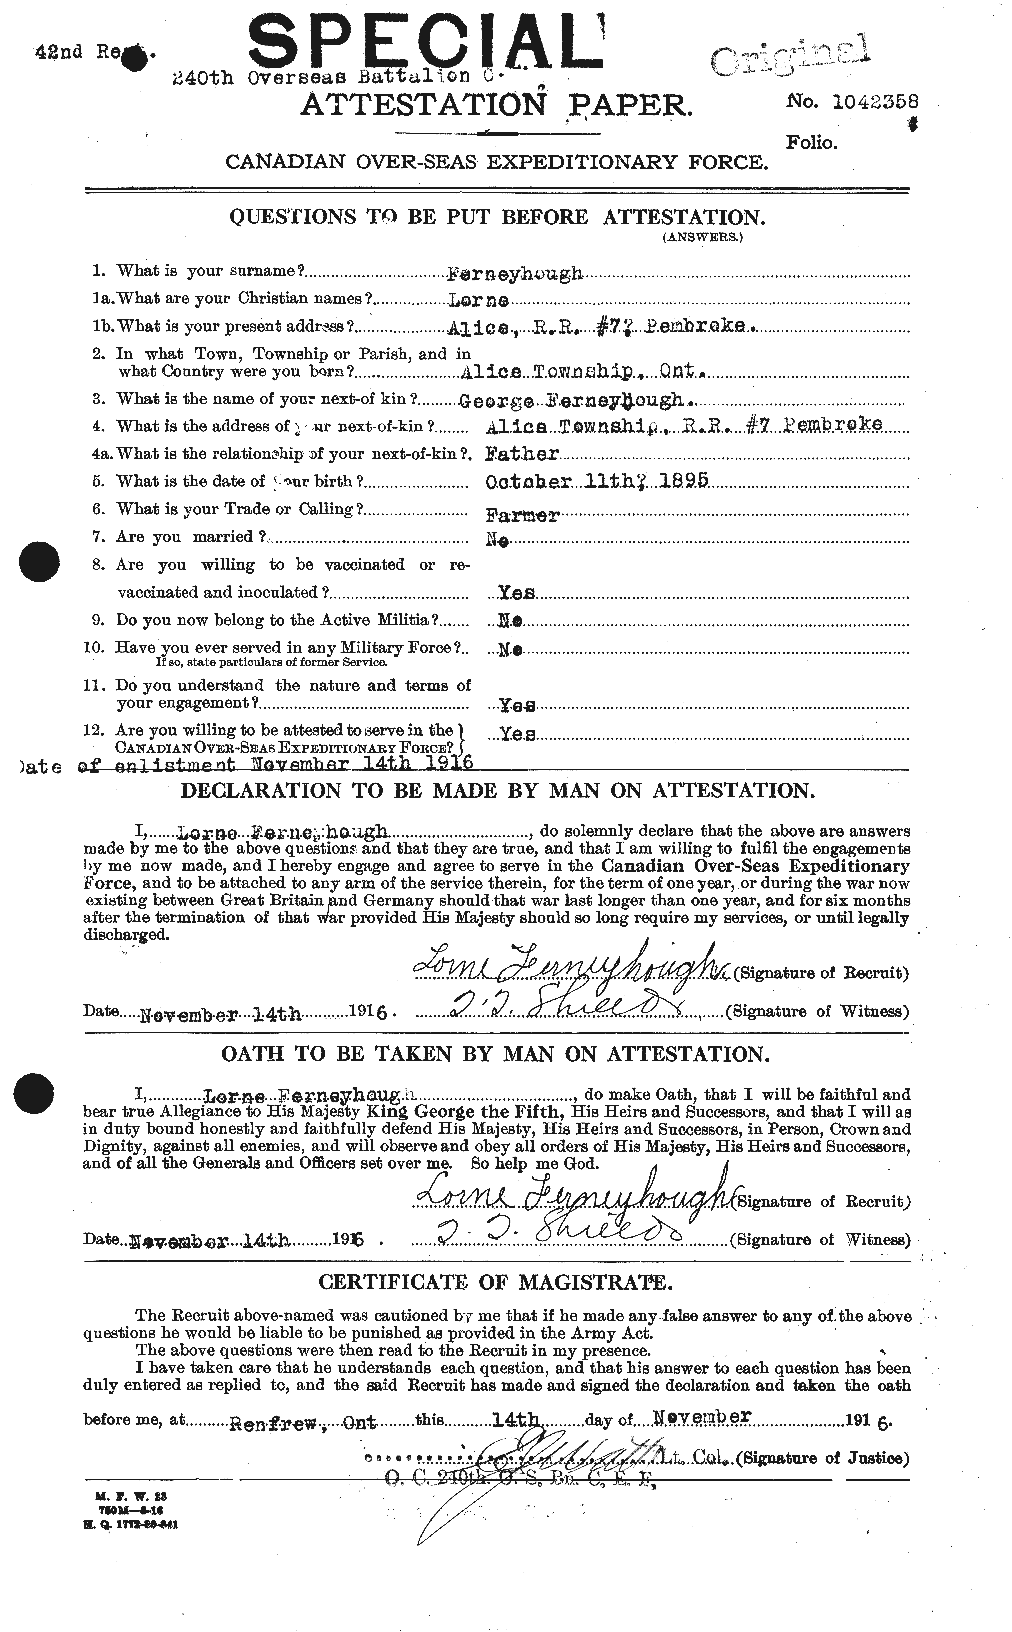 Personnel Records of the First World War - CEF 323583a